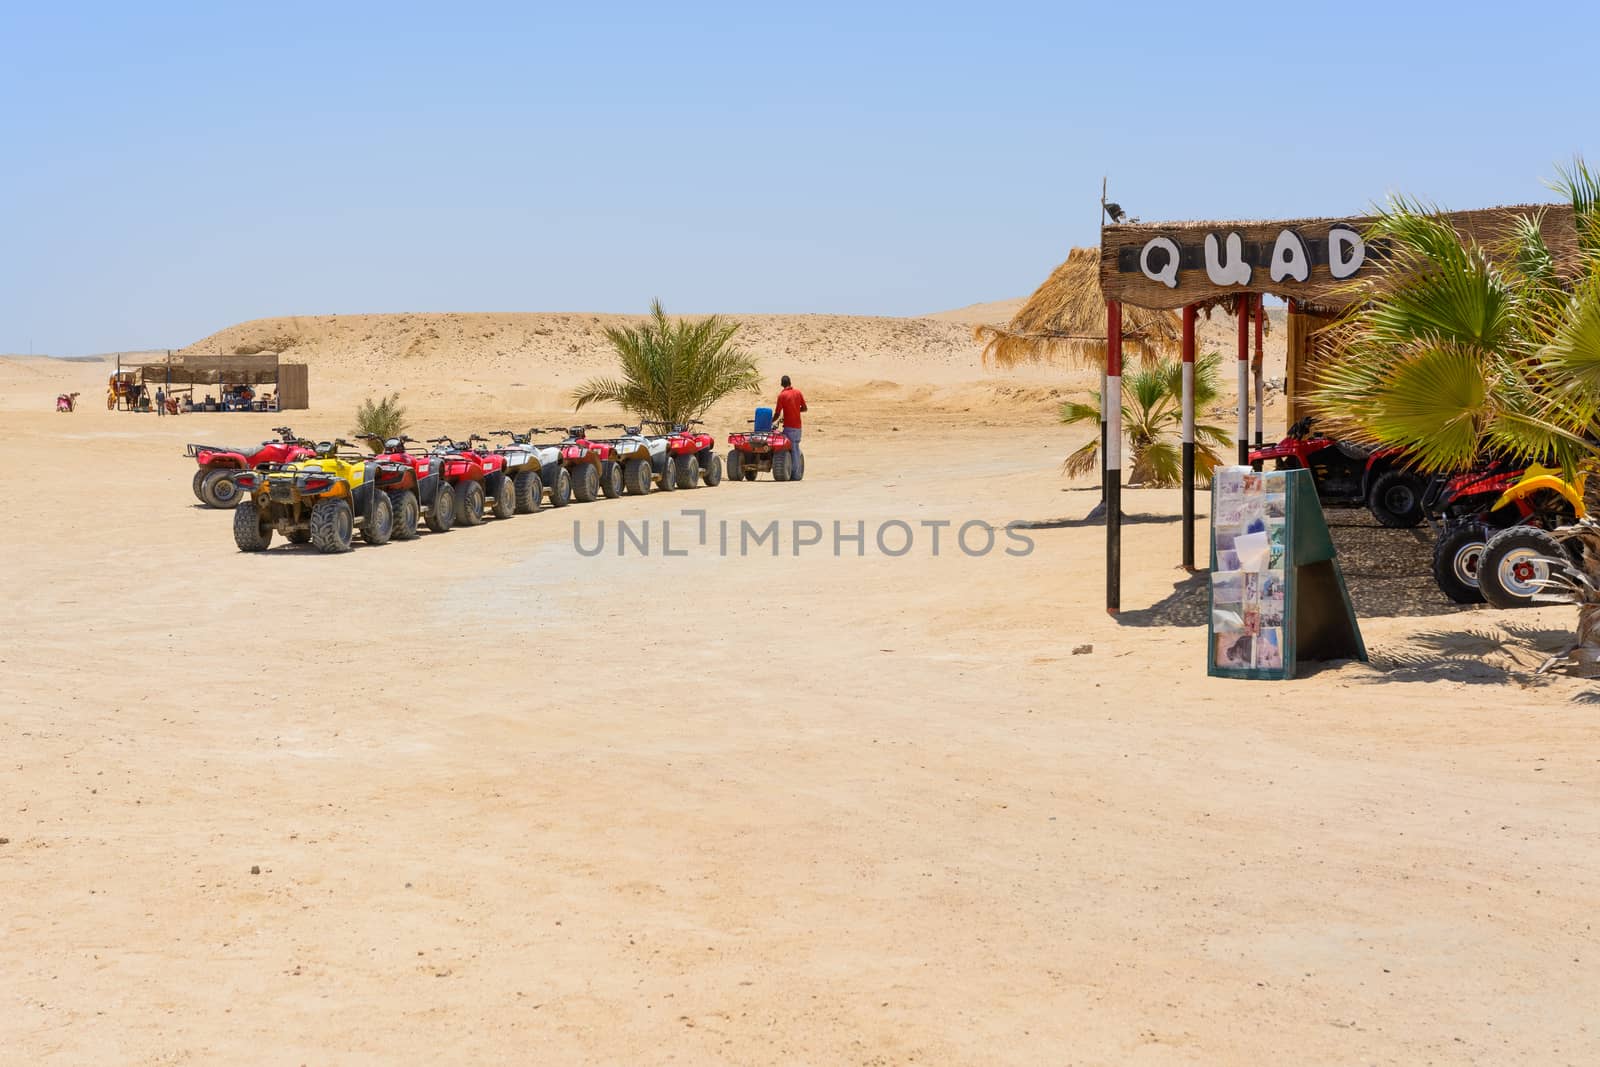 In the picture a row of oblique quad where a man fill up with petrol at the quad and in the background the Egyptian desert